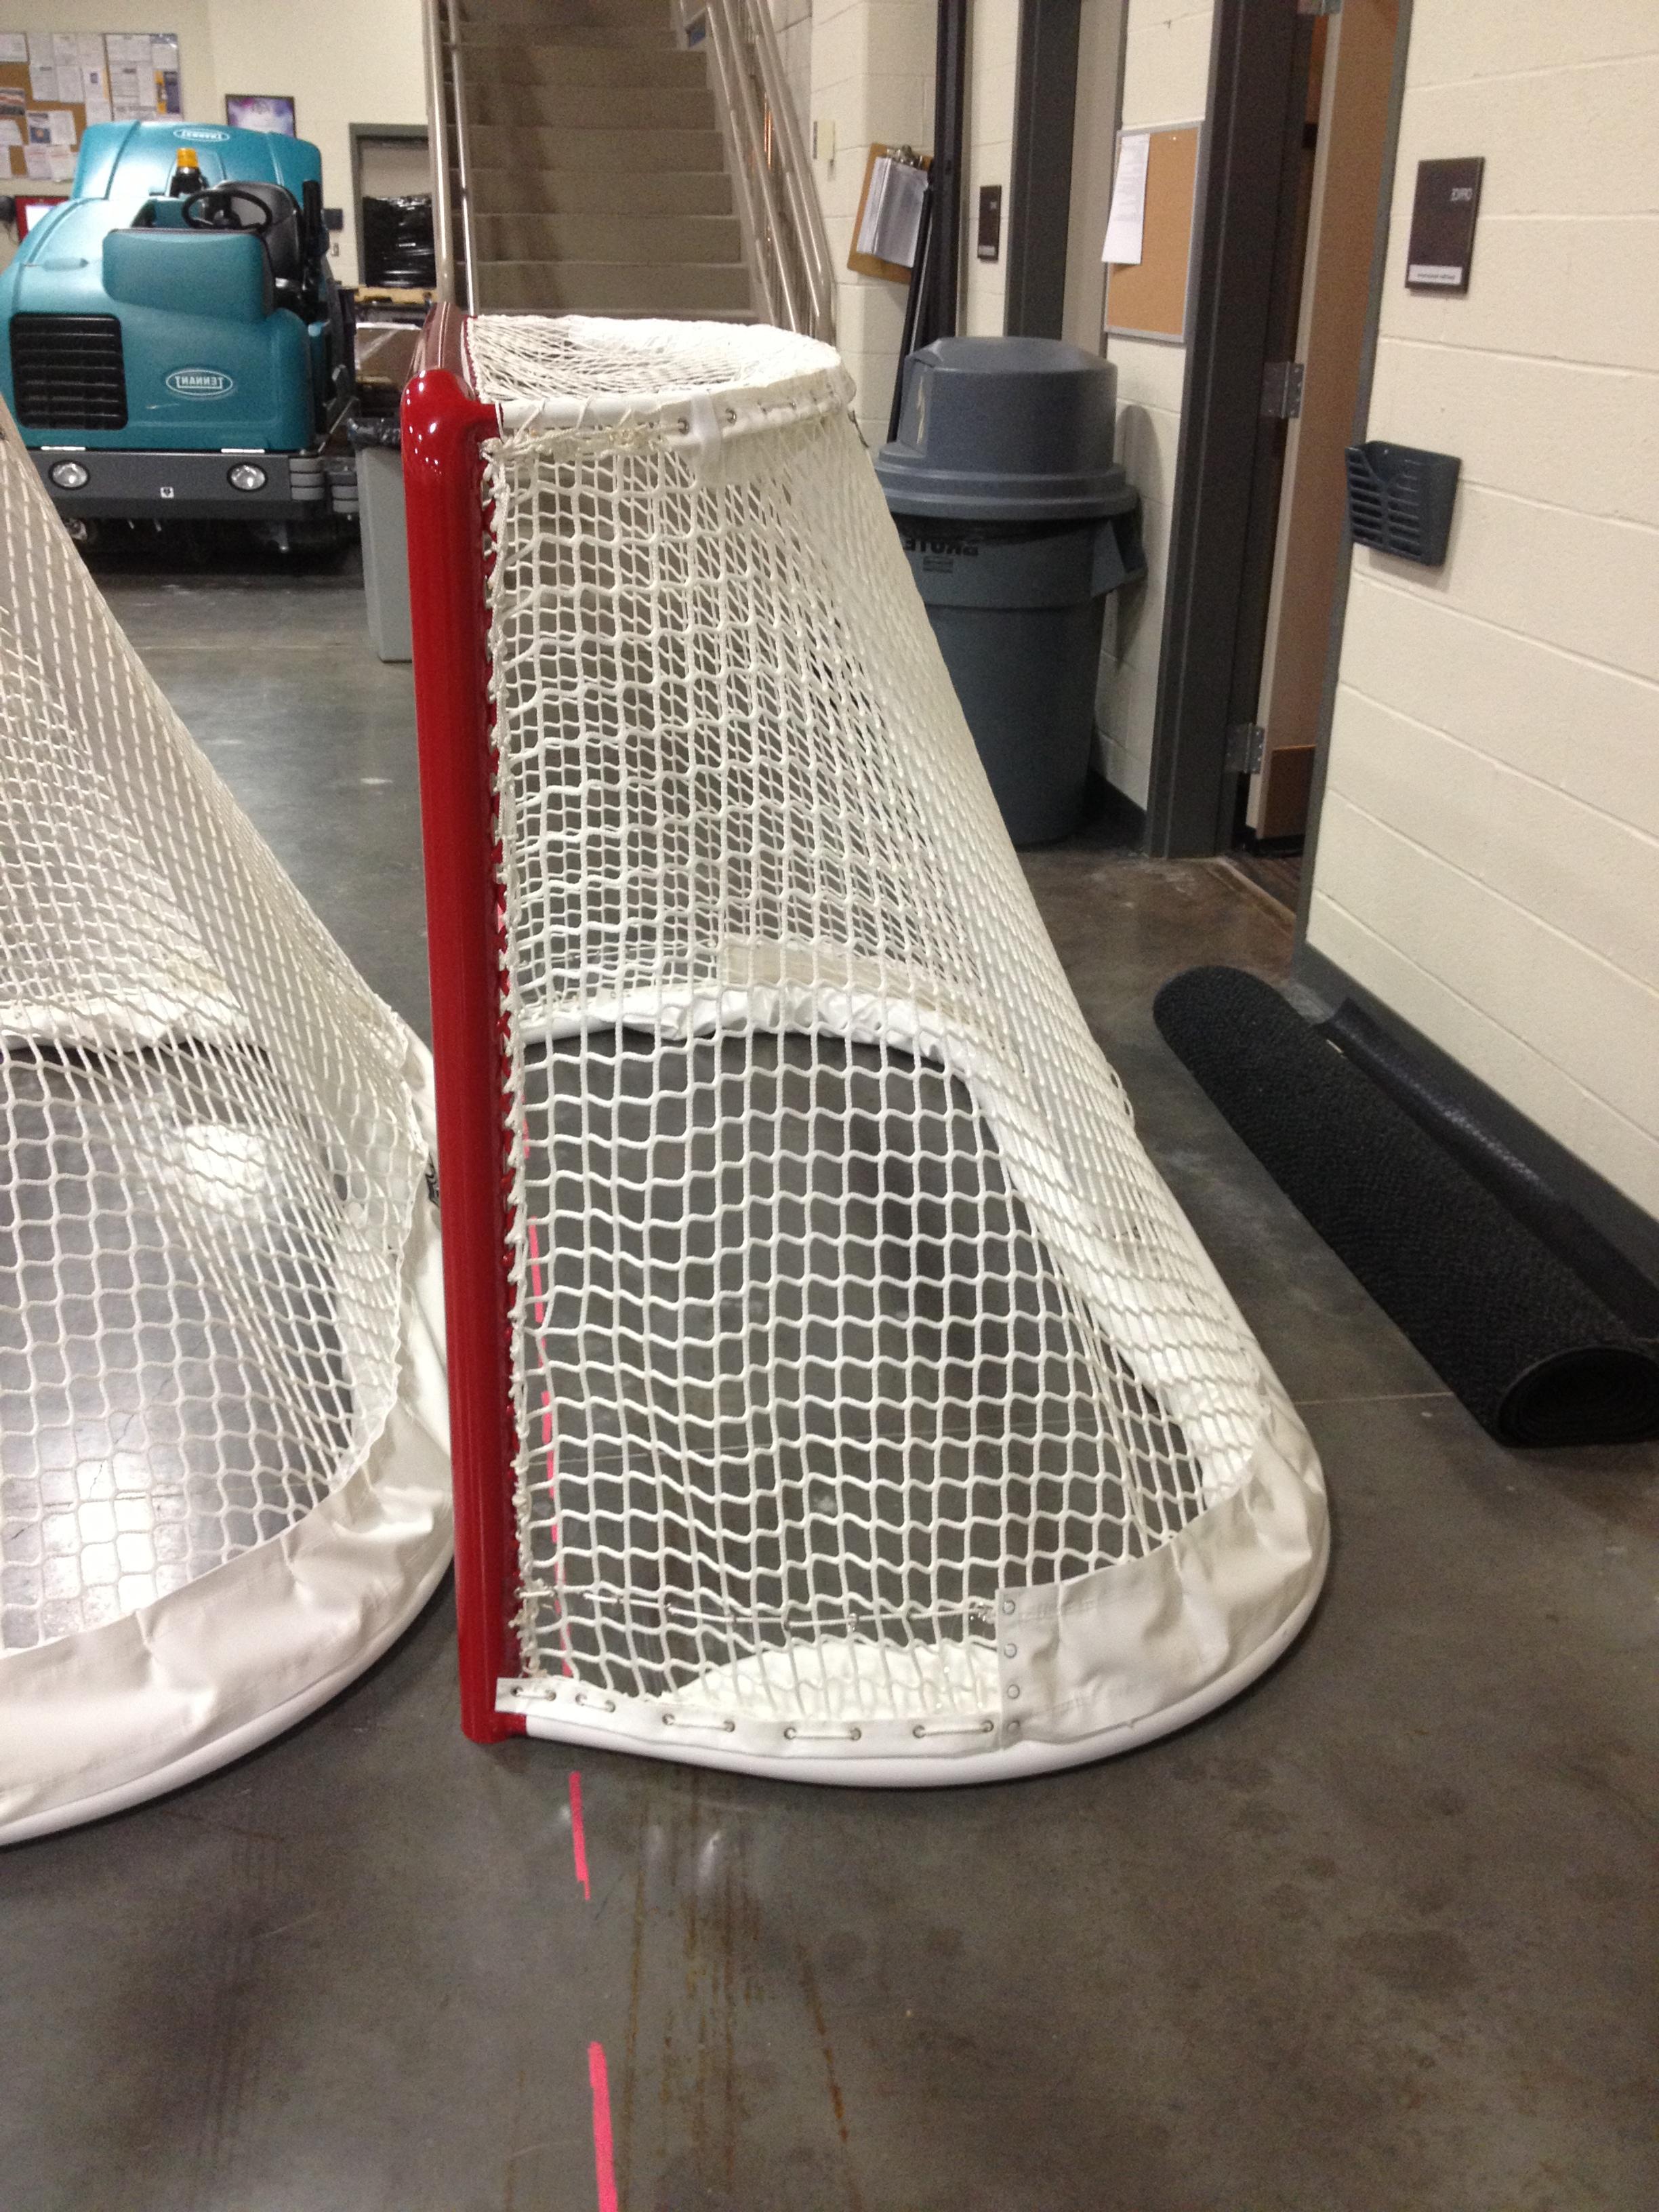 NHL introduces minor changes to their nets - Puck Drunk Love